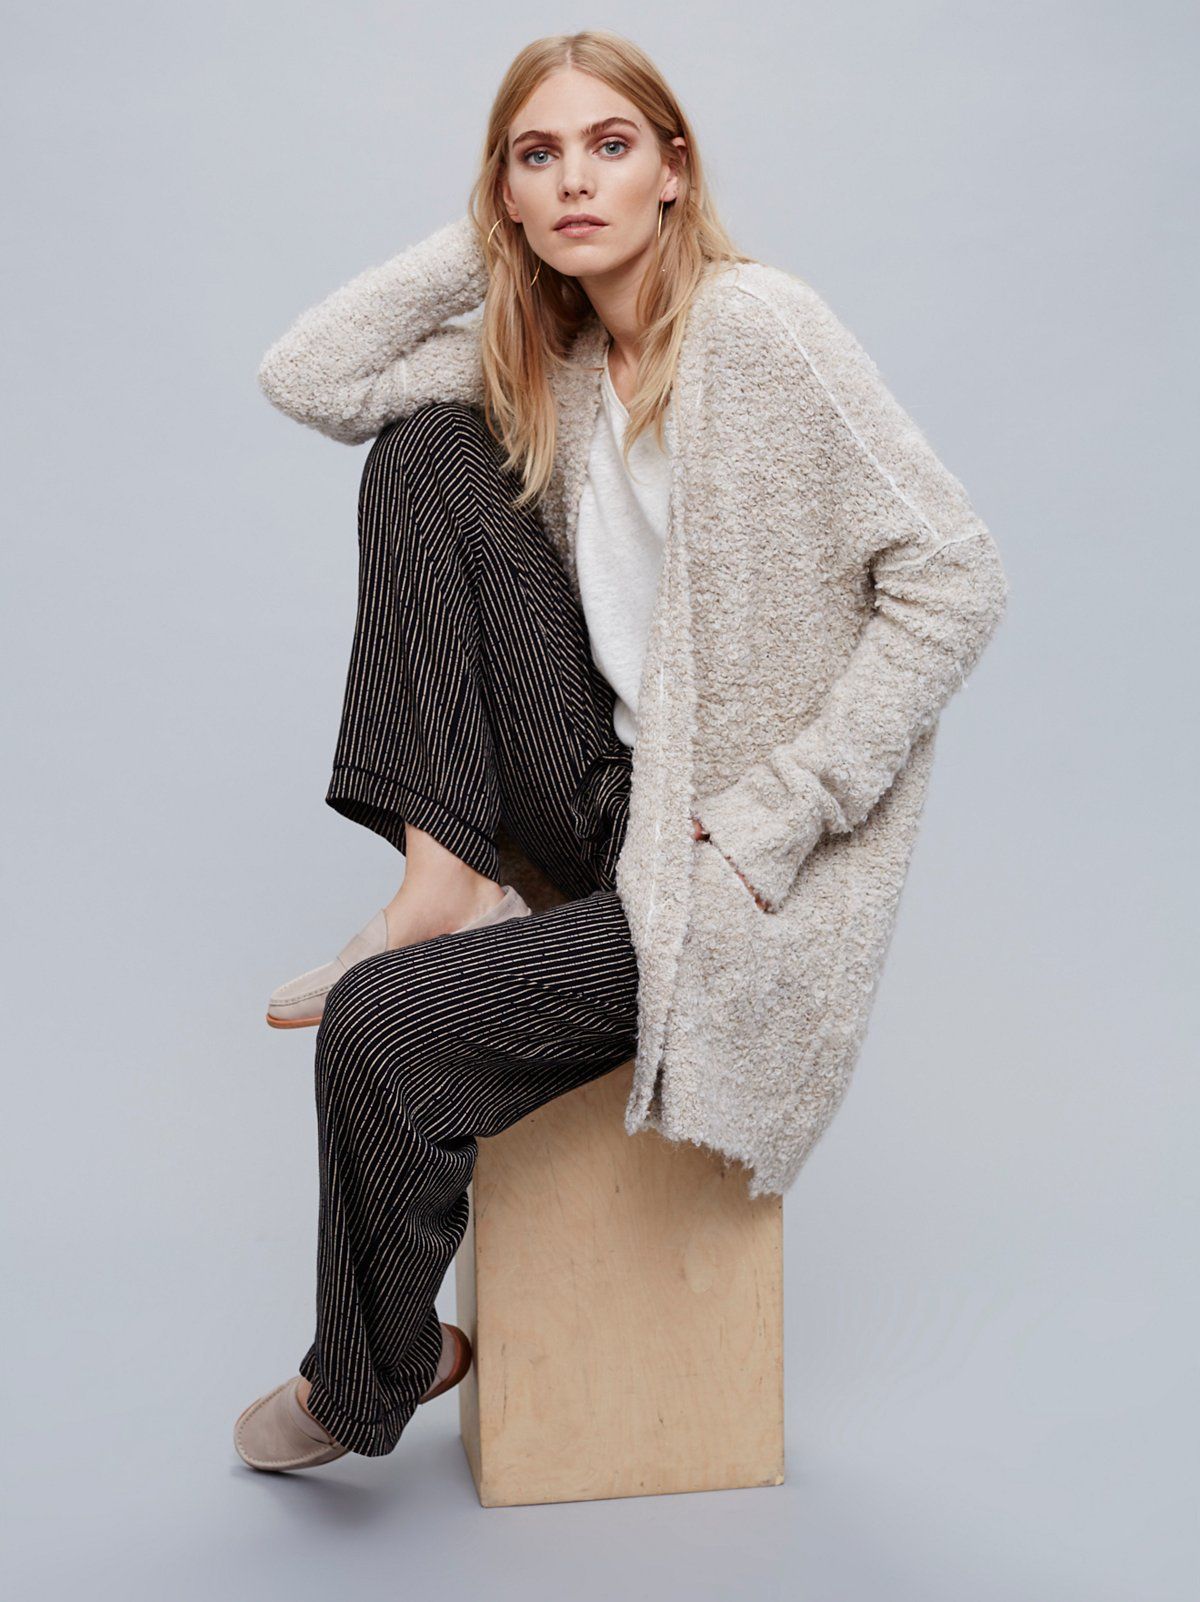 Boucle Slouch Cardi | Free People